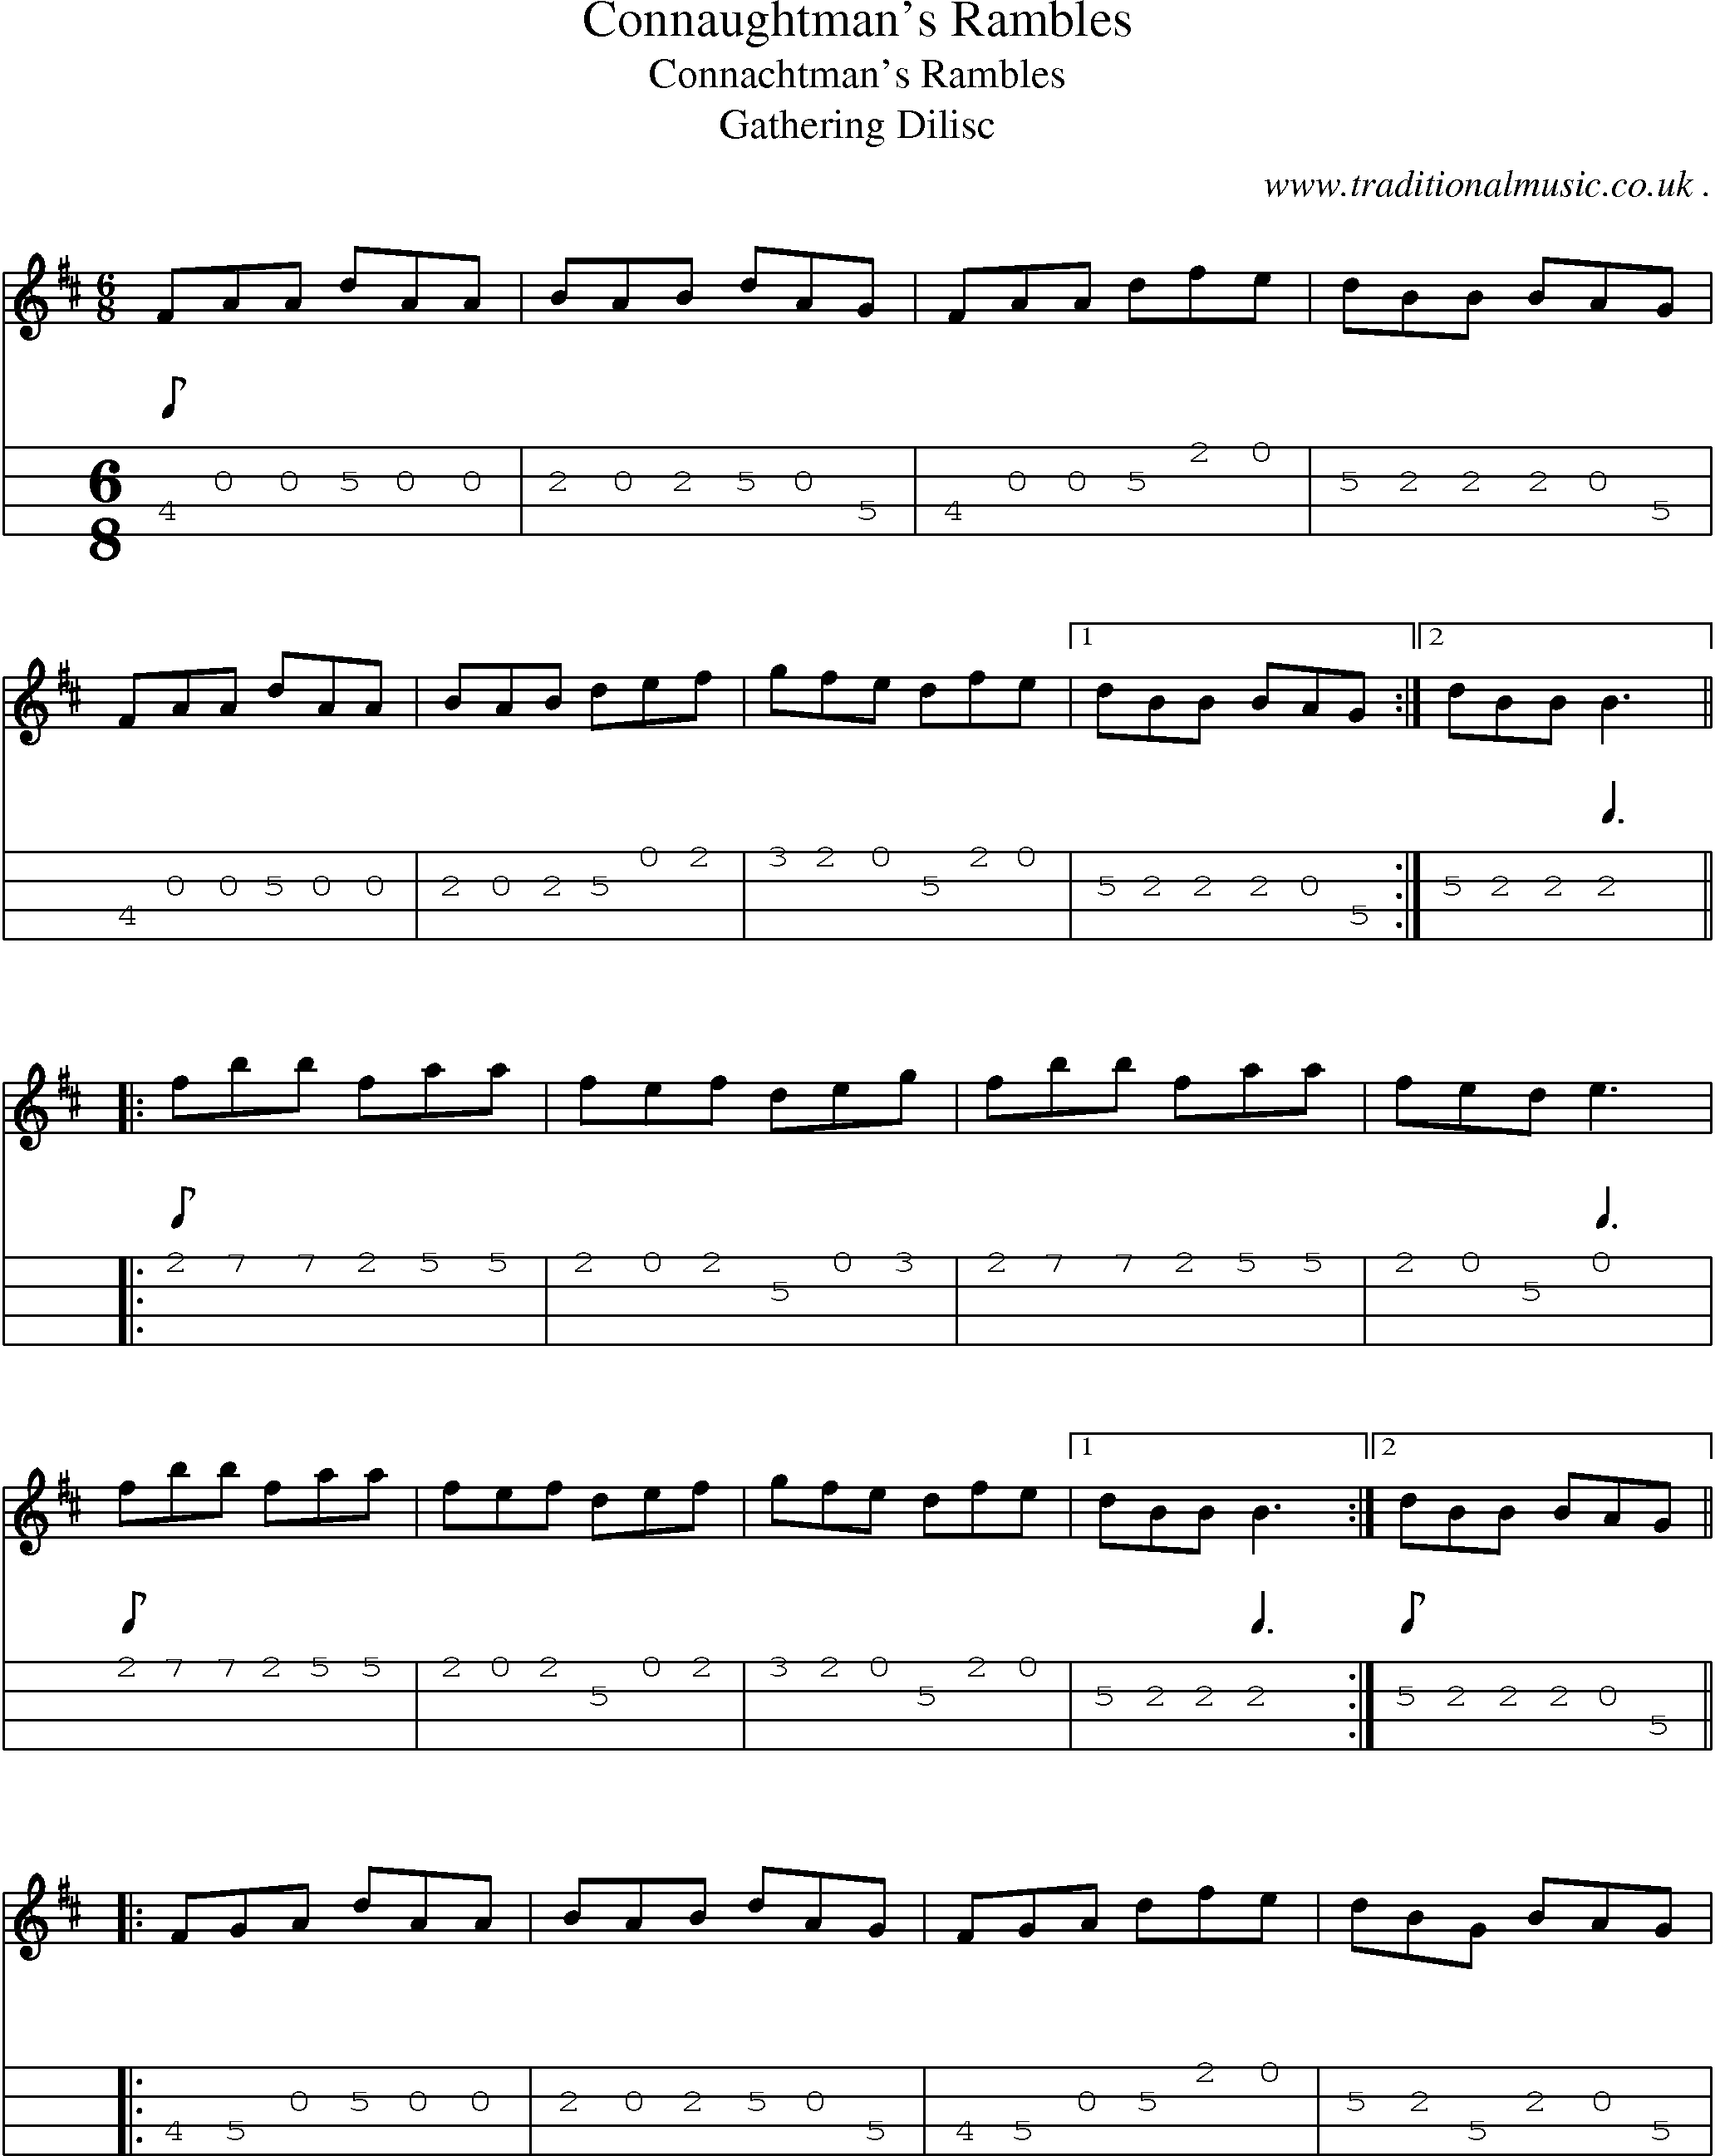 Sheet-Music and Mandolin Tabs for Connaughtmans Rambles